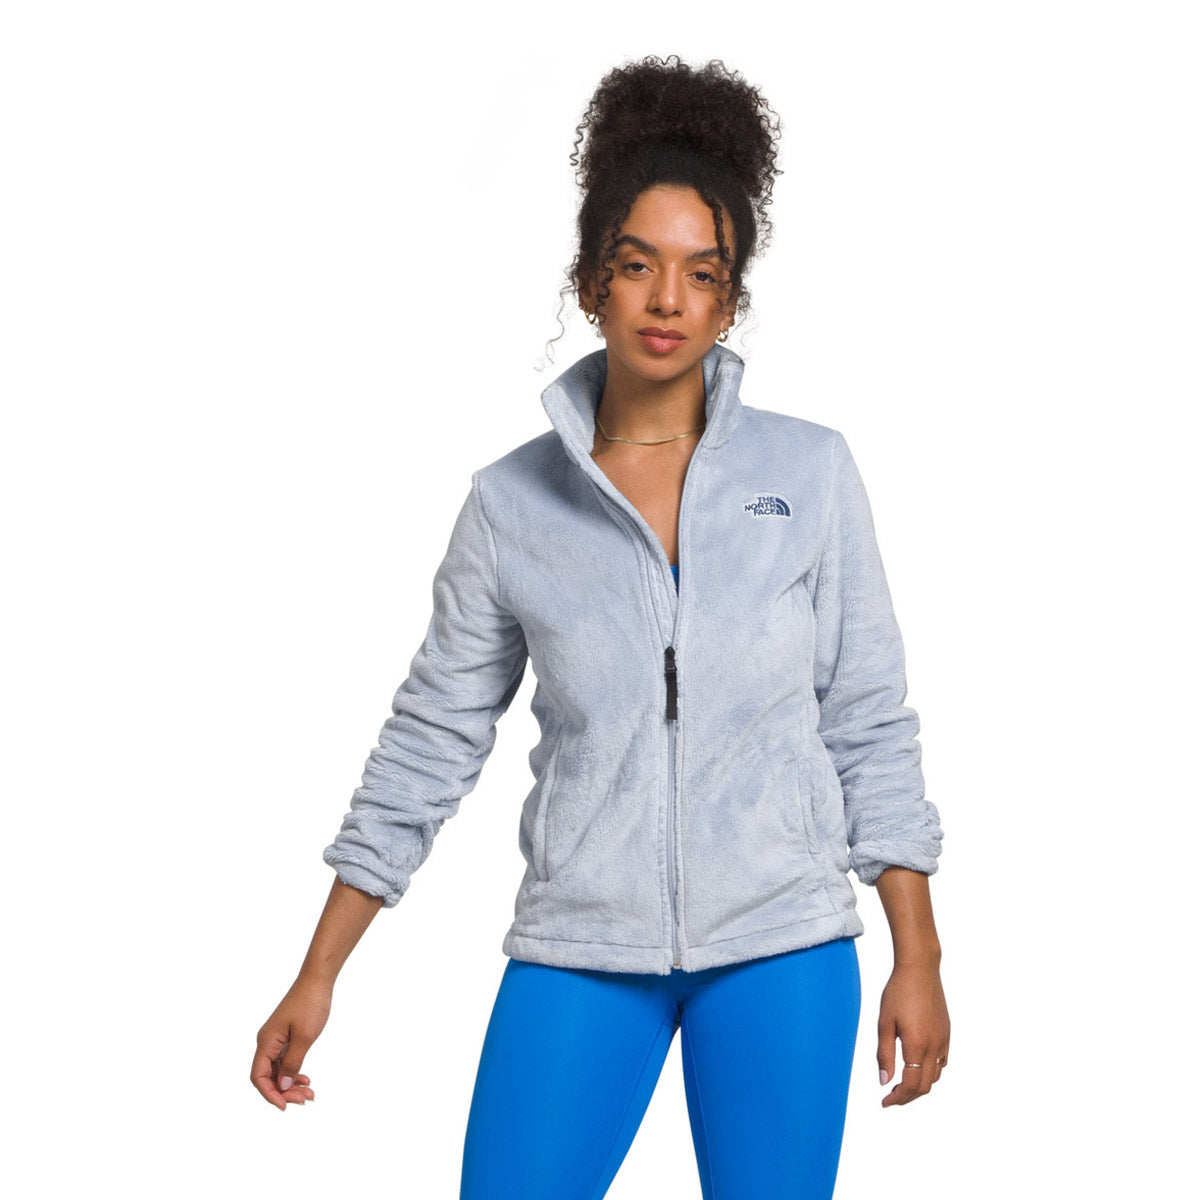 The North Face Women's Jacket Osito Long Sleeve Full Zip Soft